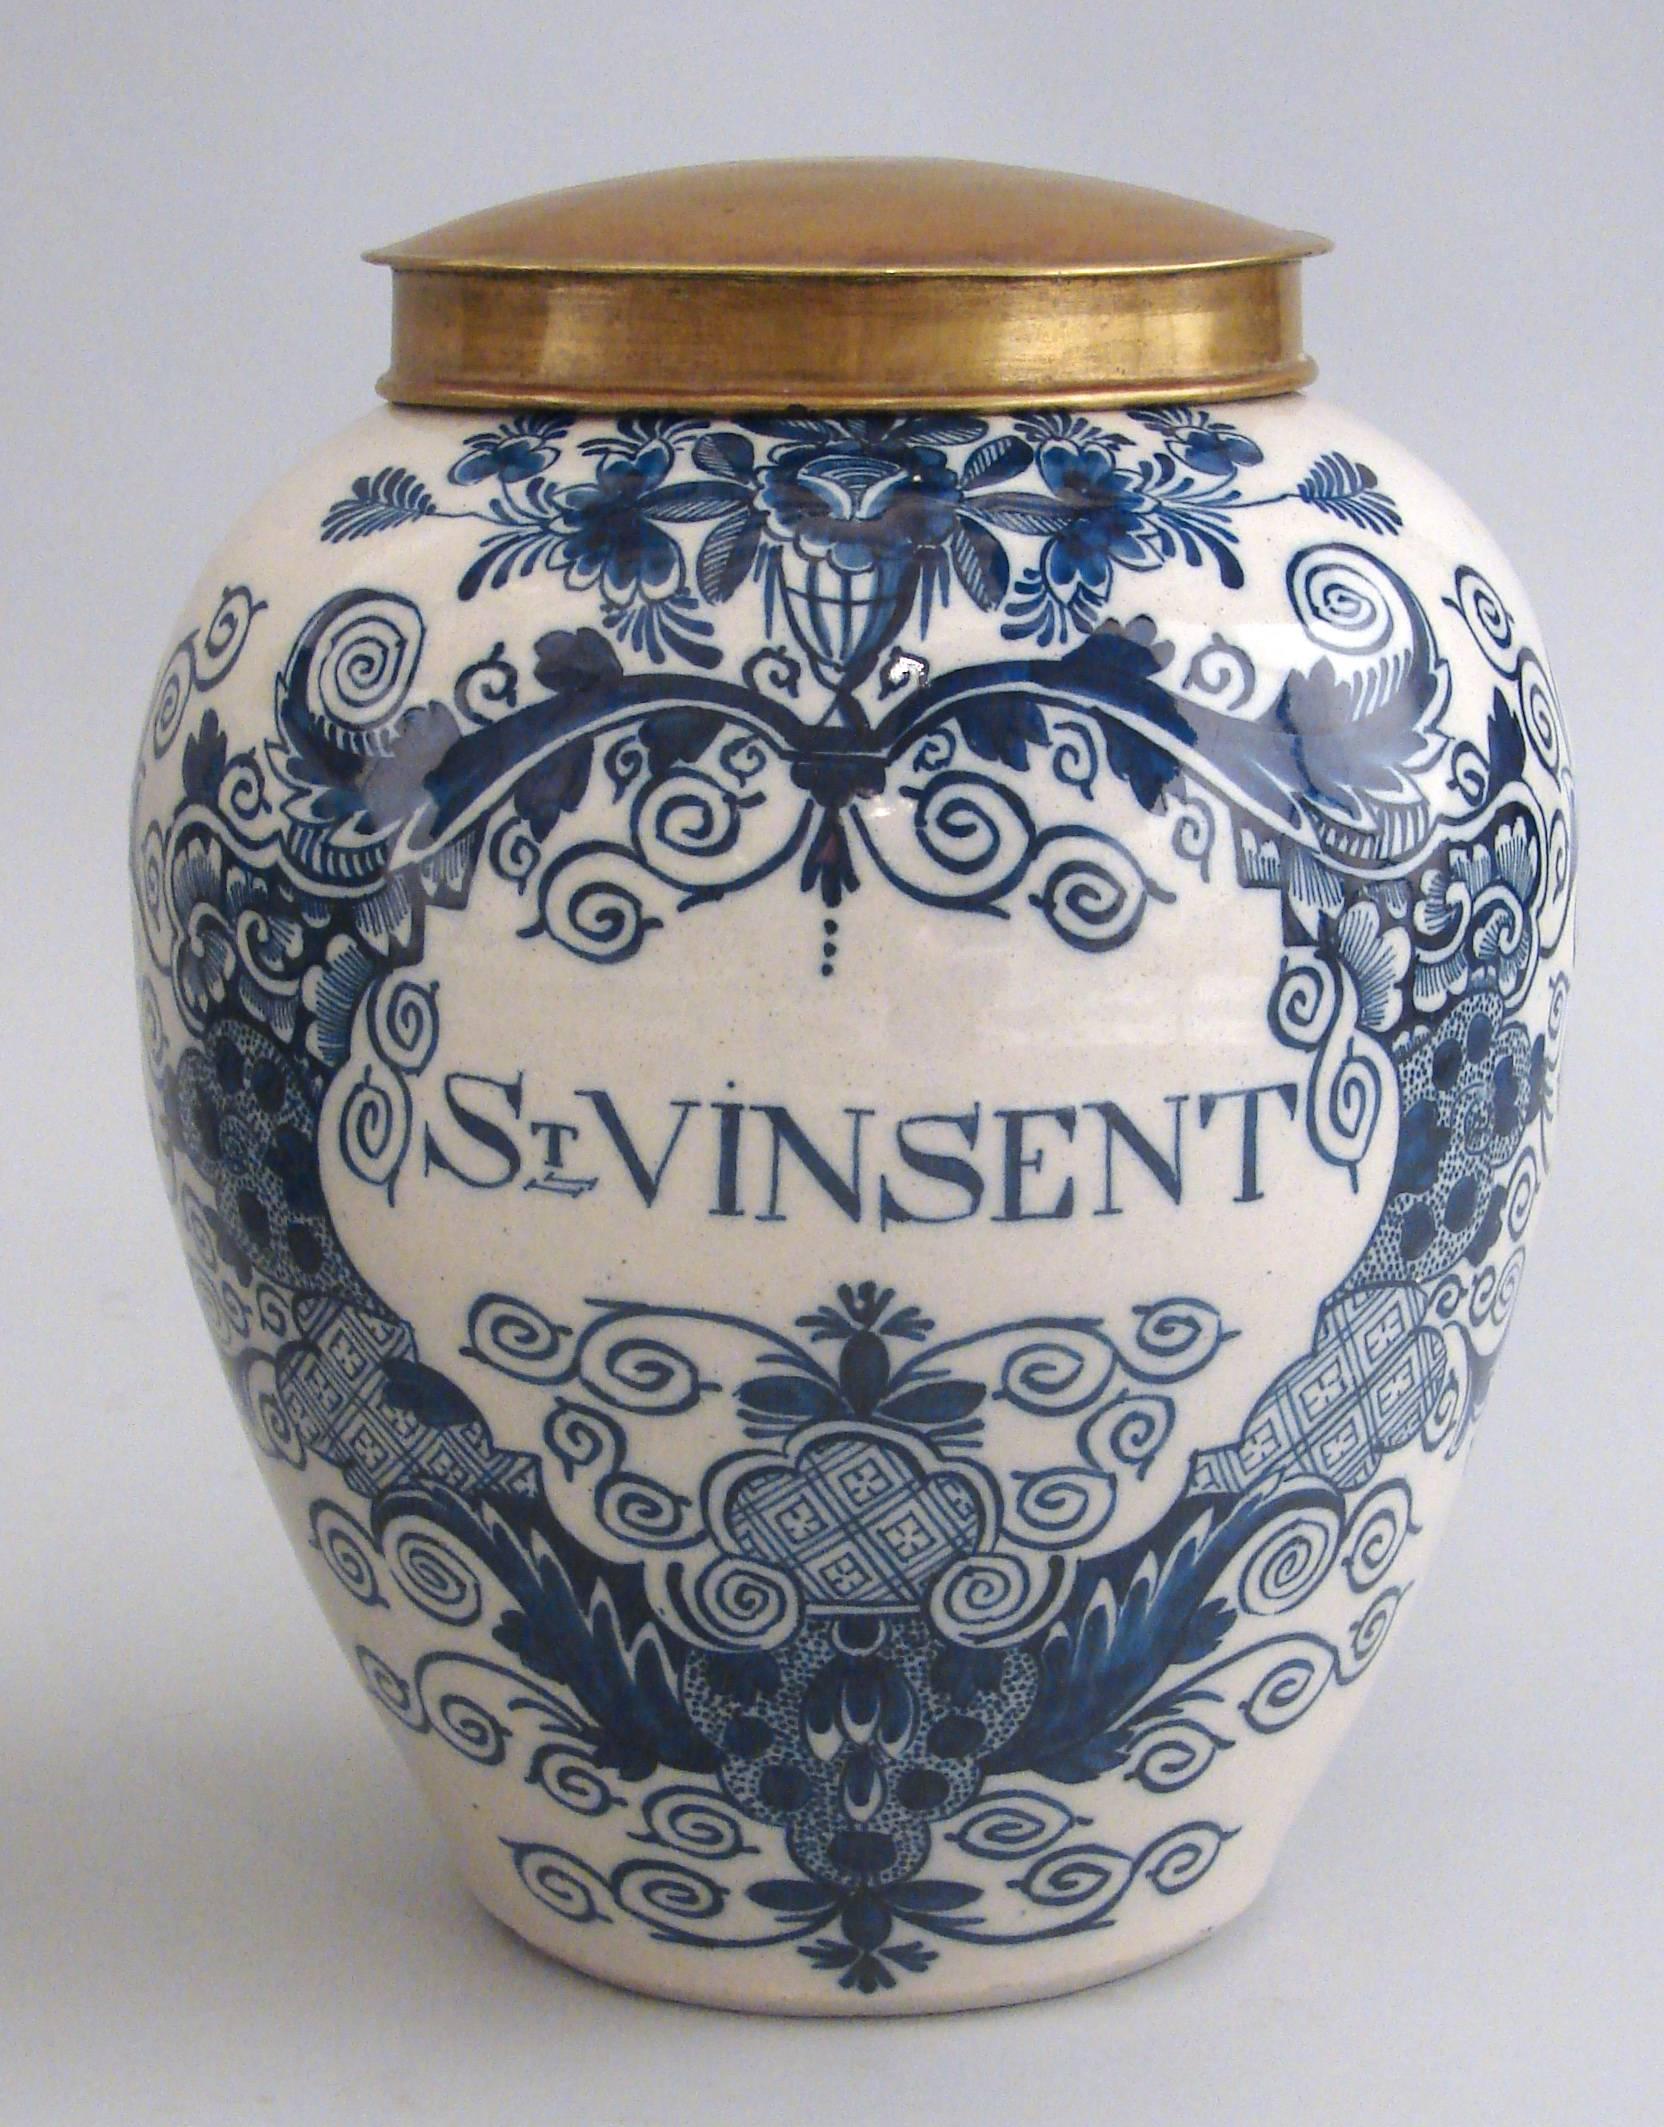 A pair of antique blue and white Dutch Delft tobacco jars of typical form with stylized floral decoration, one marked 